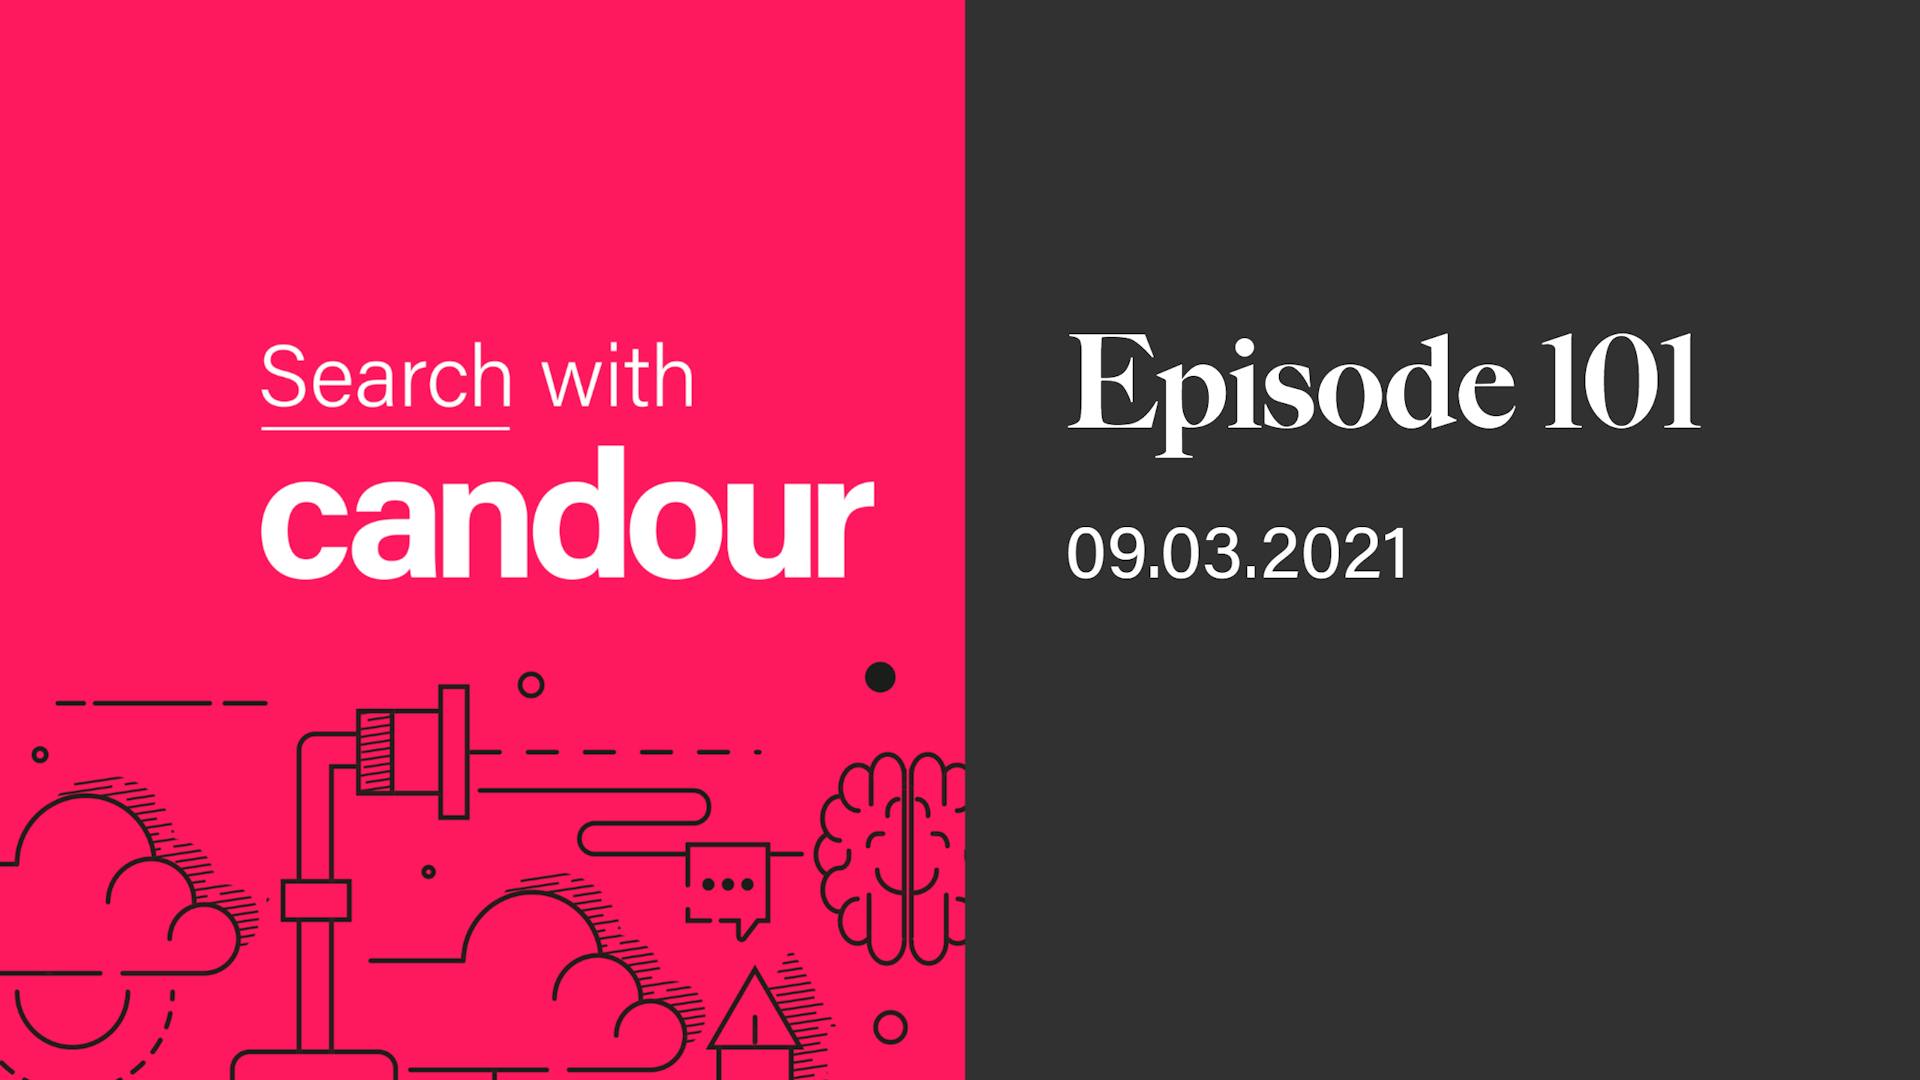 Episode 101 - Search with Candour